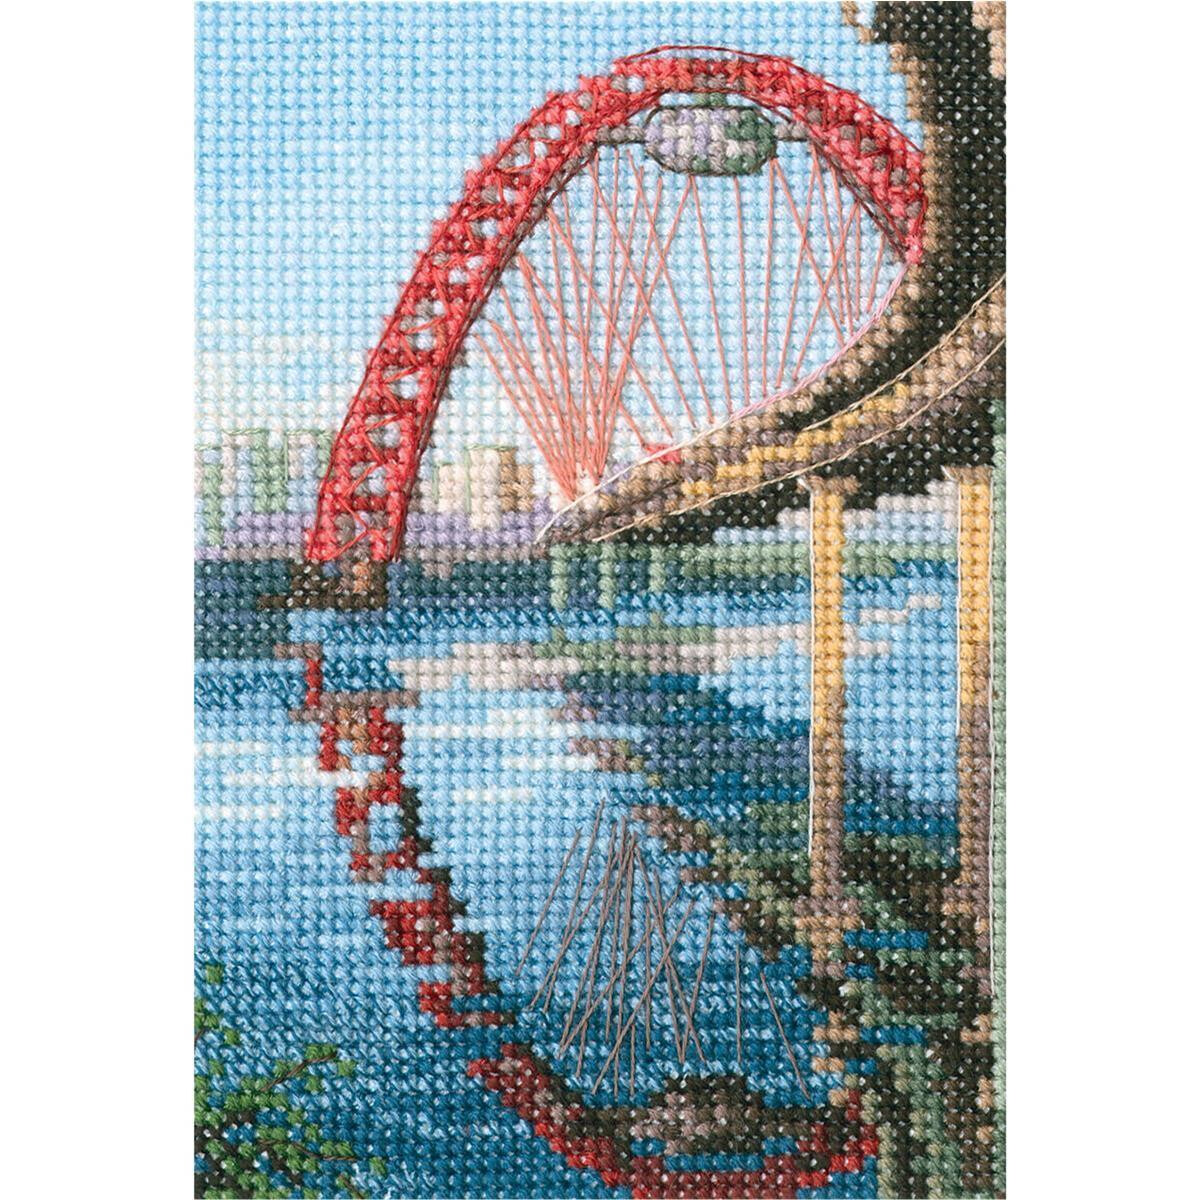 RTO counted Cross Stitch Kit "Picturesque...